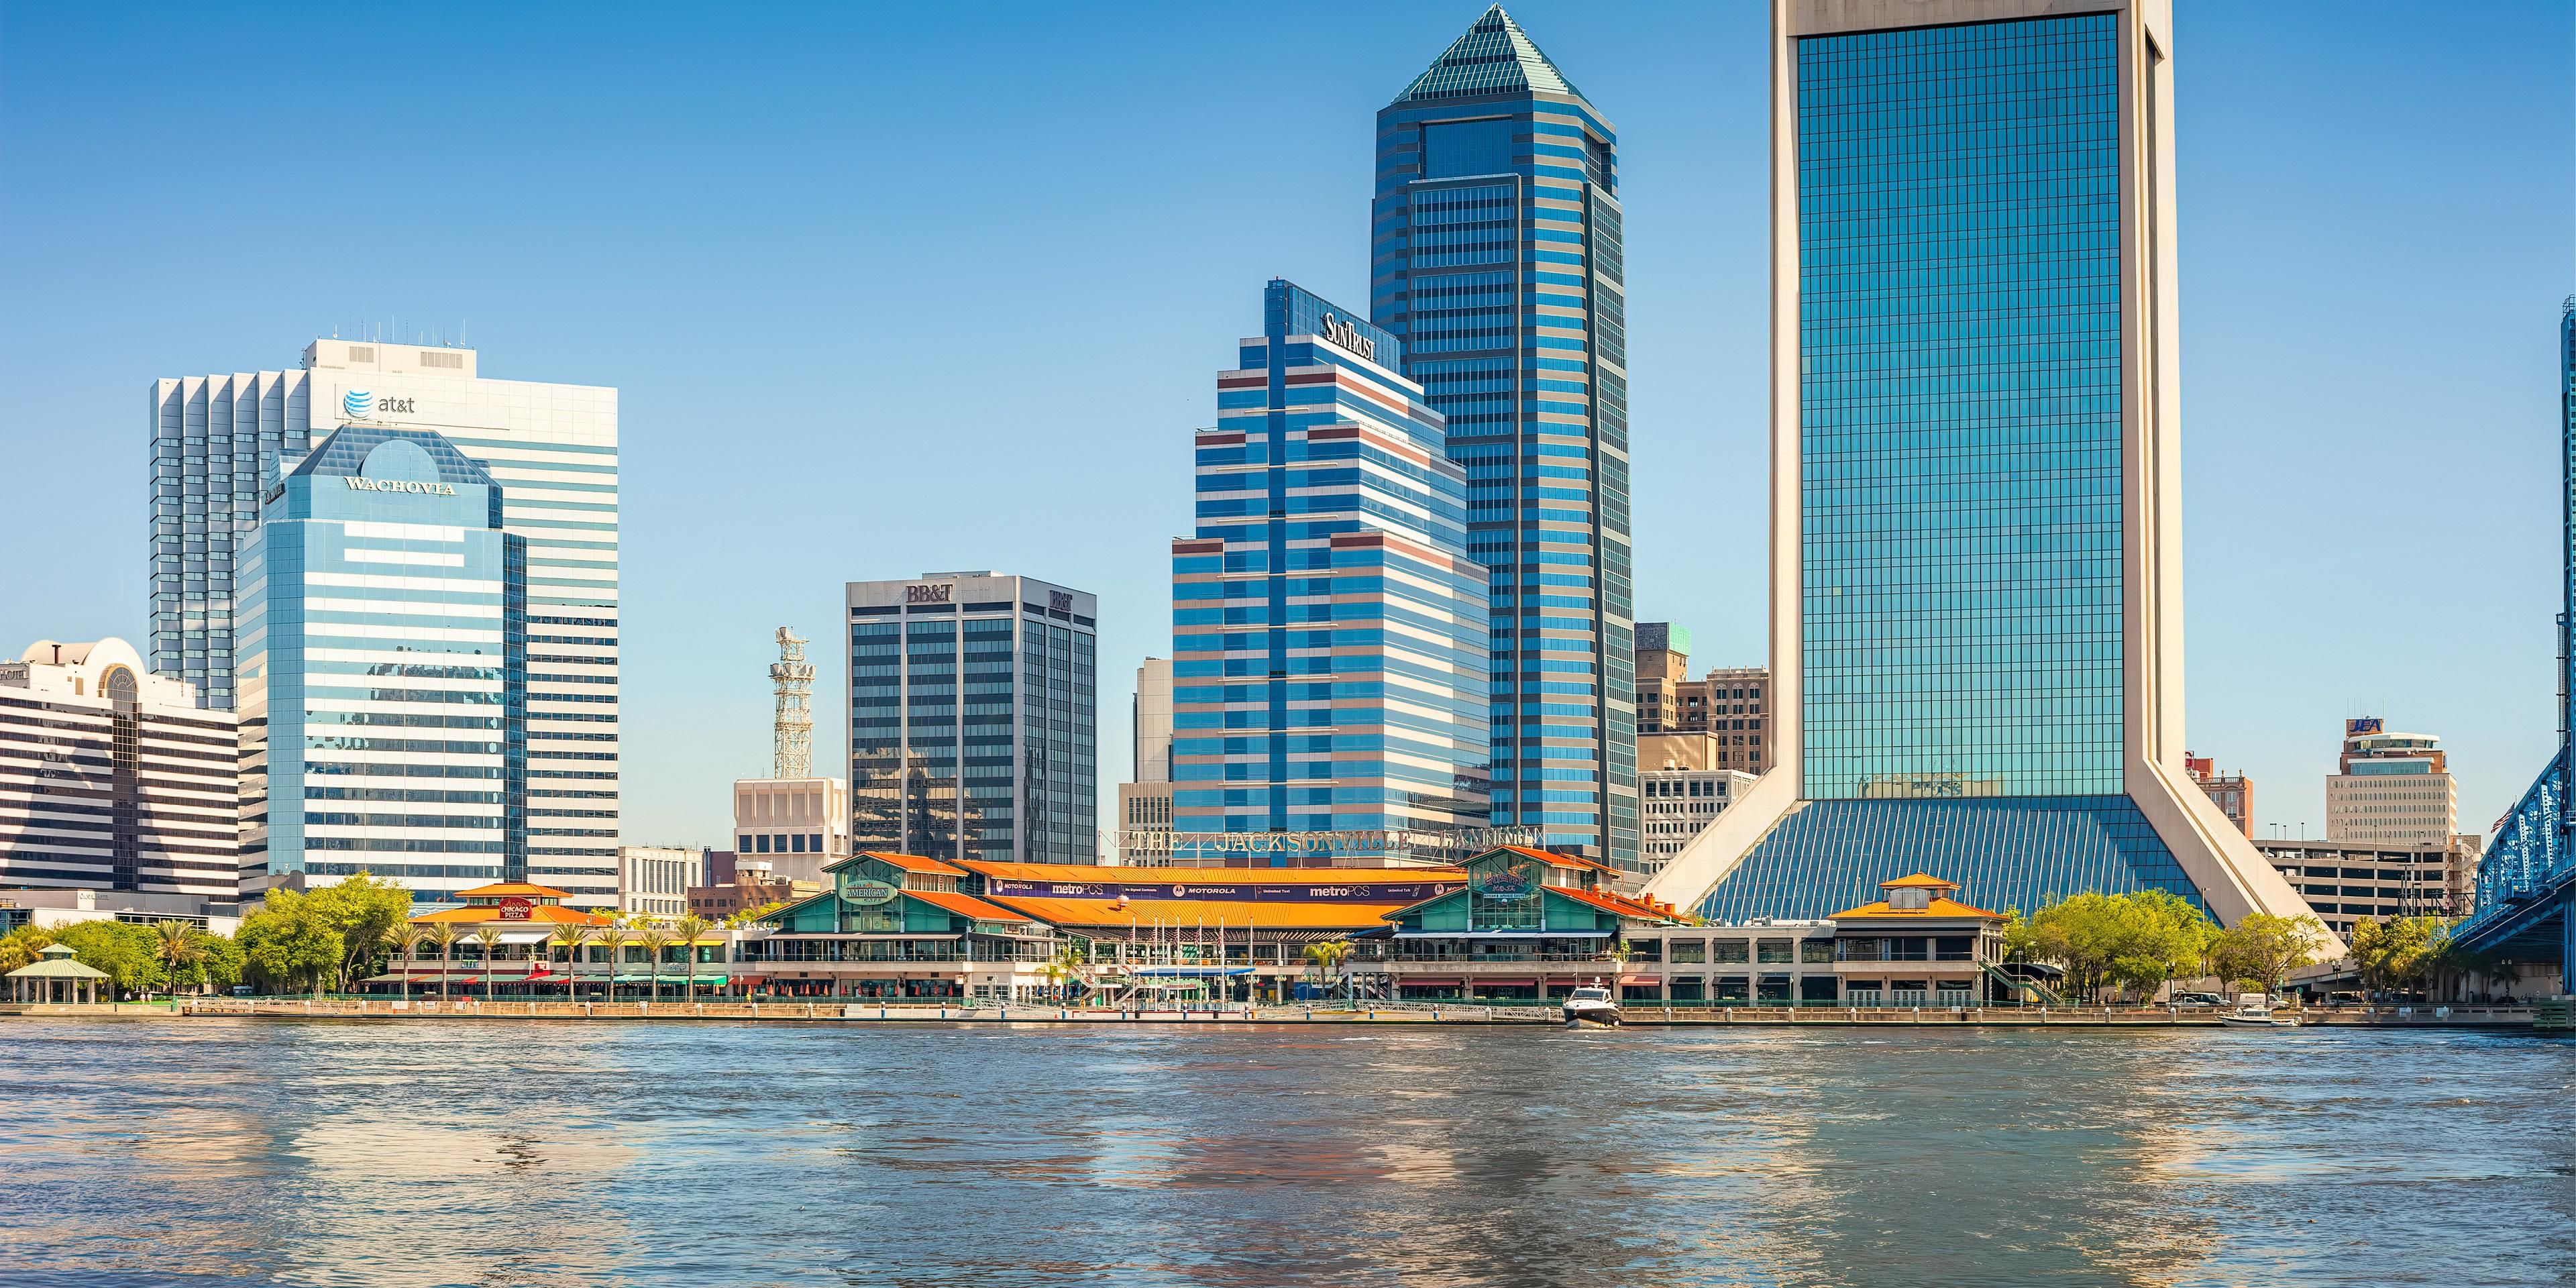 Jacksonville's best attractions are just outside your door when you stay at the Holiday Inn Express & Suites Jacksonville-Town Center. Enjoy shopping & dining at St Johns Town Center; take in a game or a show at TIAA Bank Field; play at Topgolf or iFly Indoor Skydiving. Take a short drive to explore Amelia Island or the many Jacksonville beaches.